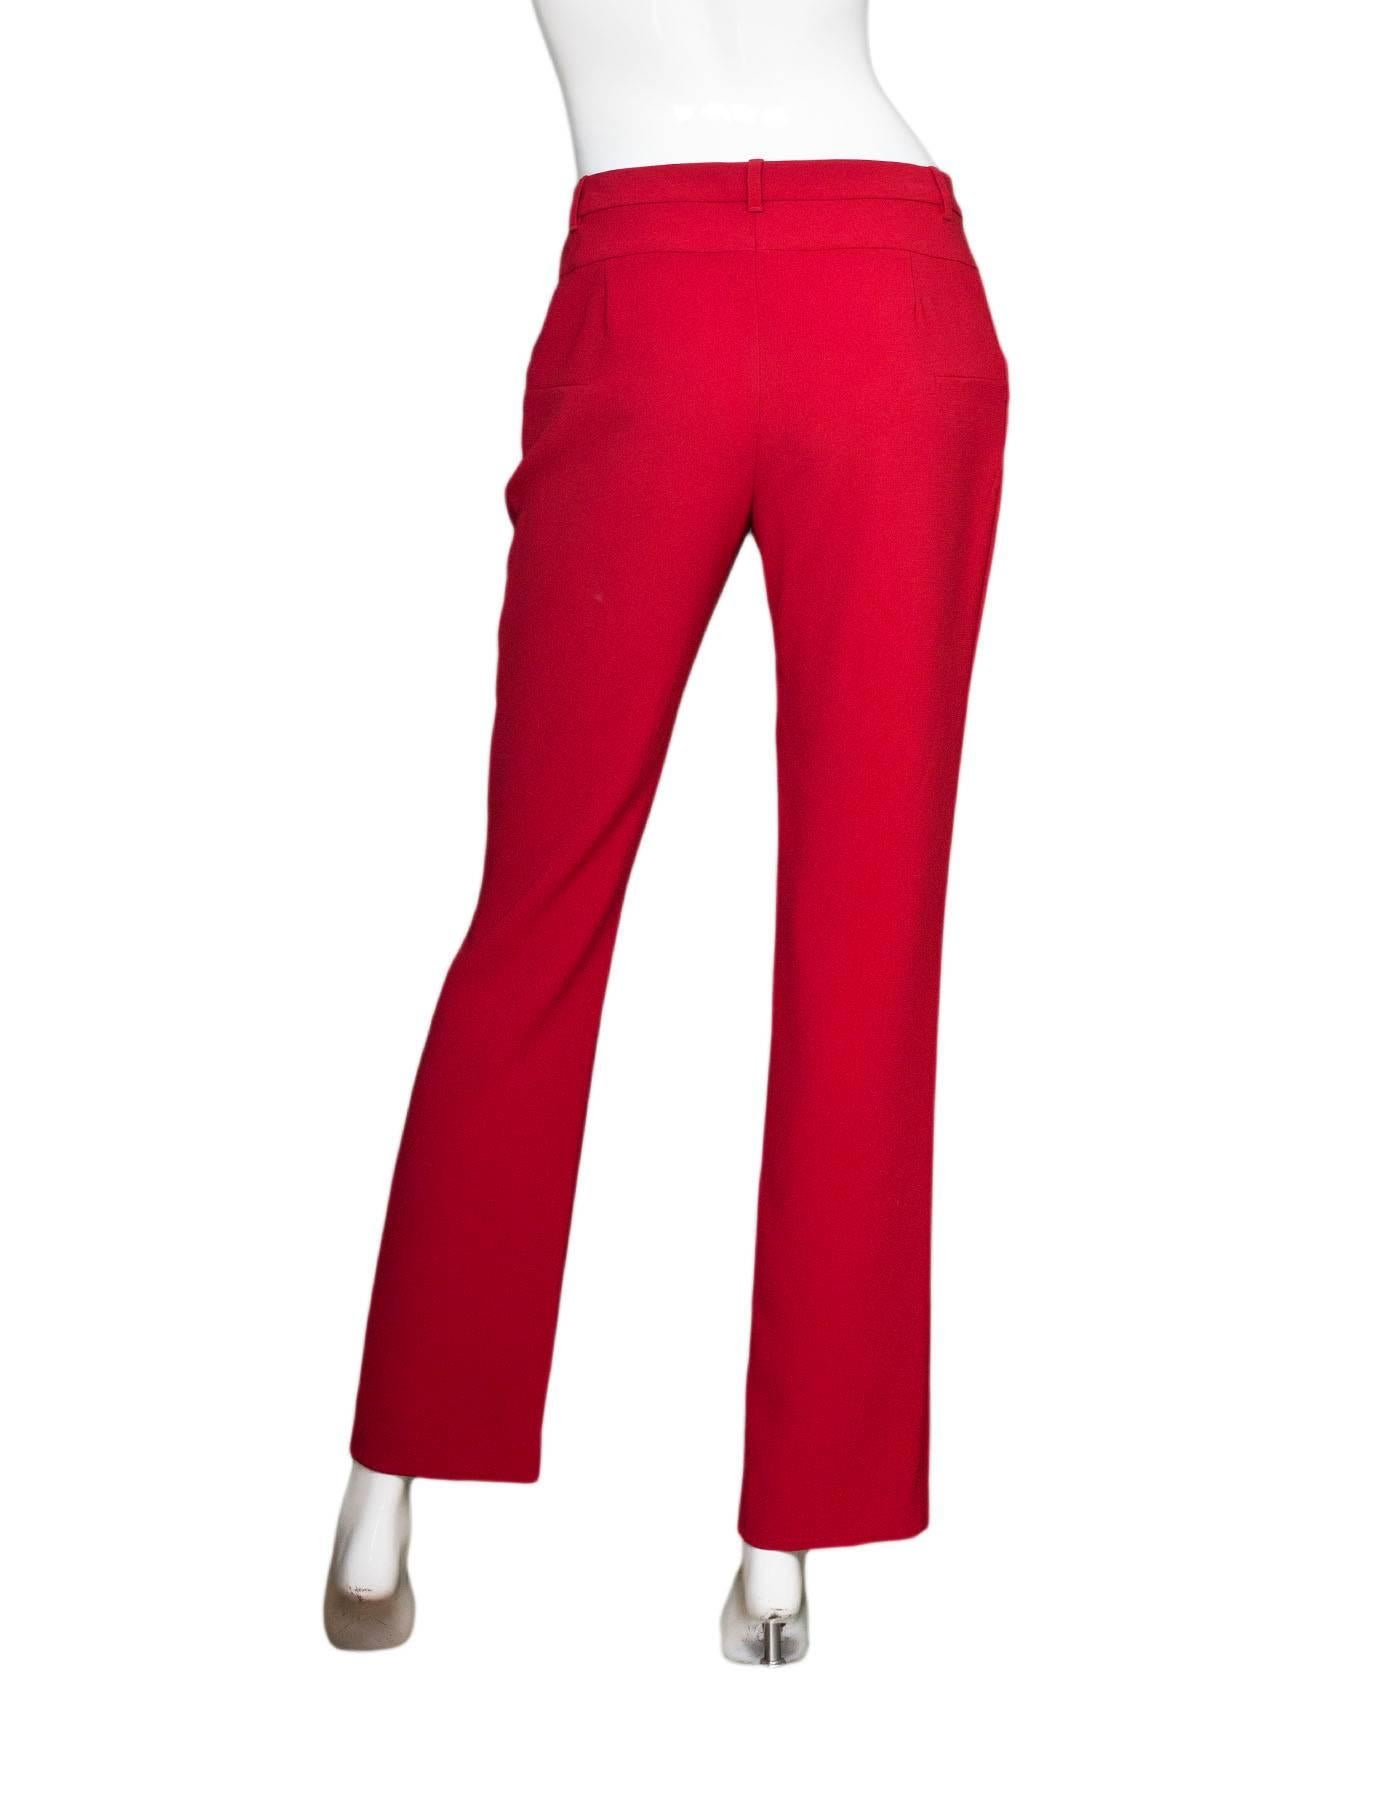 Altuzarra Red Pants Sz IT38 rt $550 In Excellent Condition In New York, NY